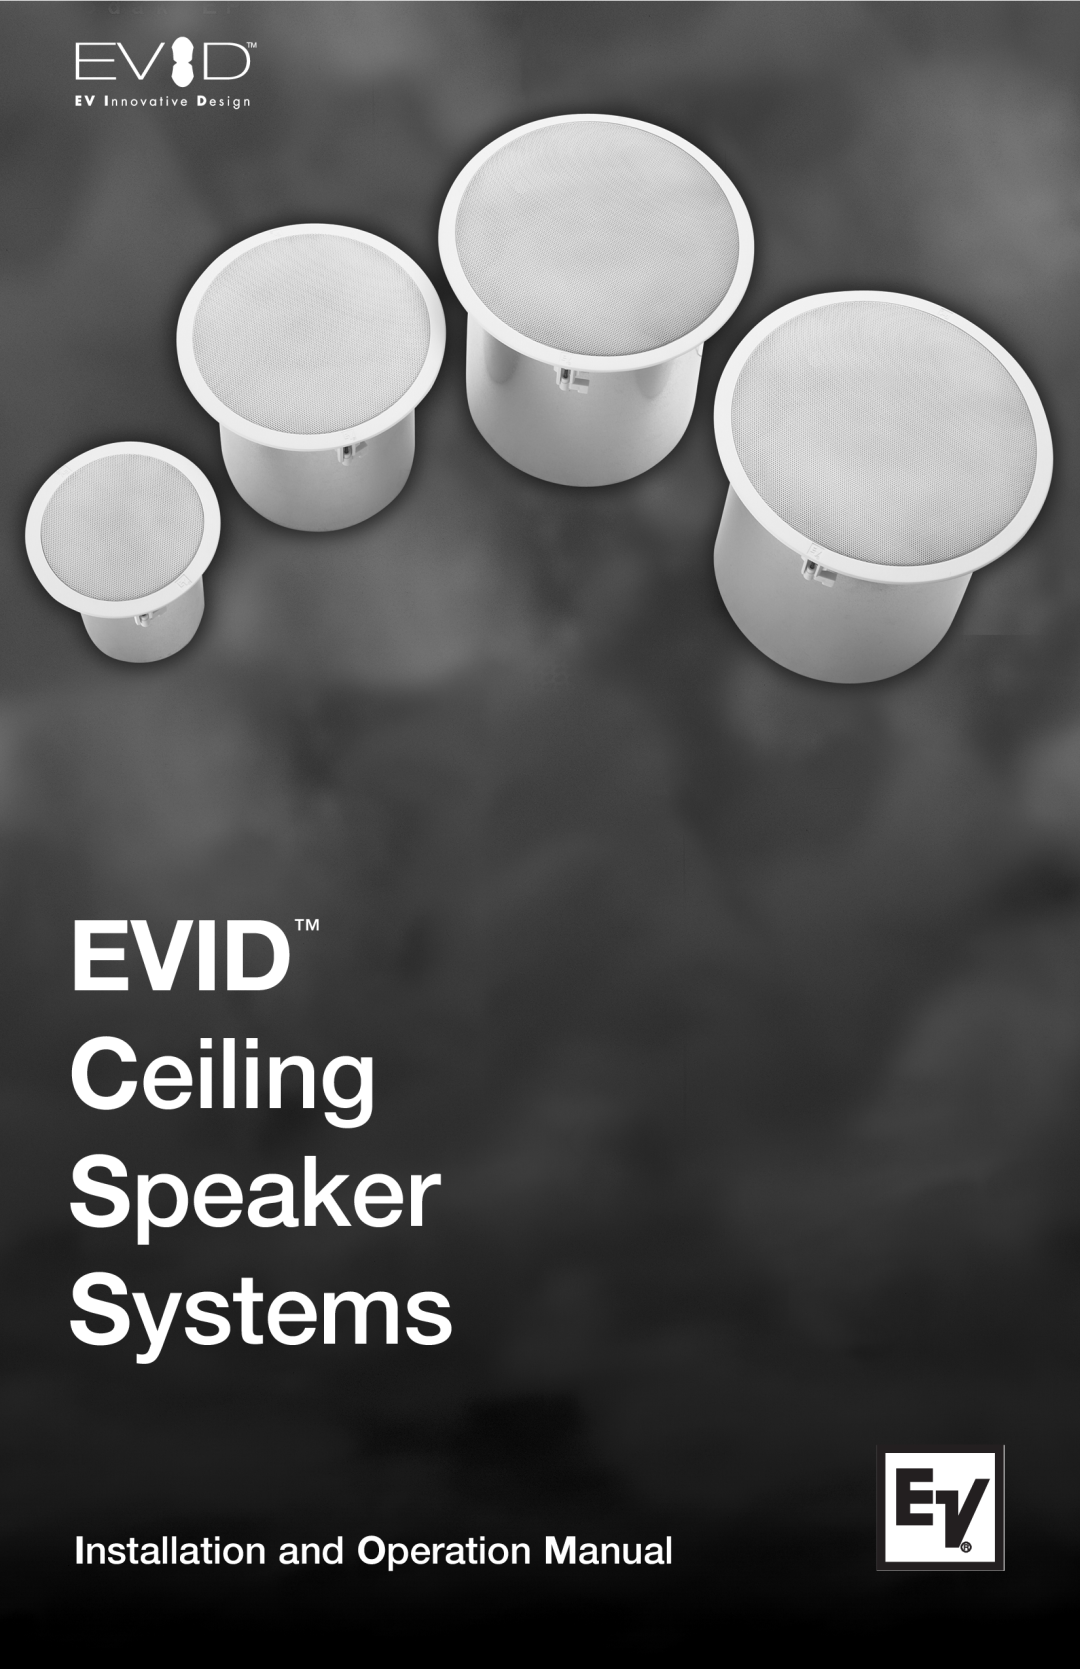 Electro-Voice EVID operation manual Evid, Ceiling Speaker Systems 